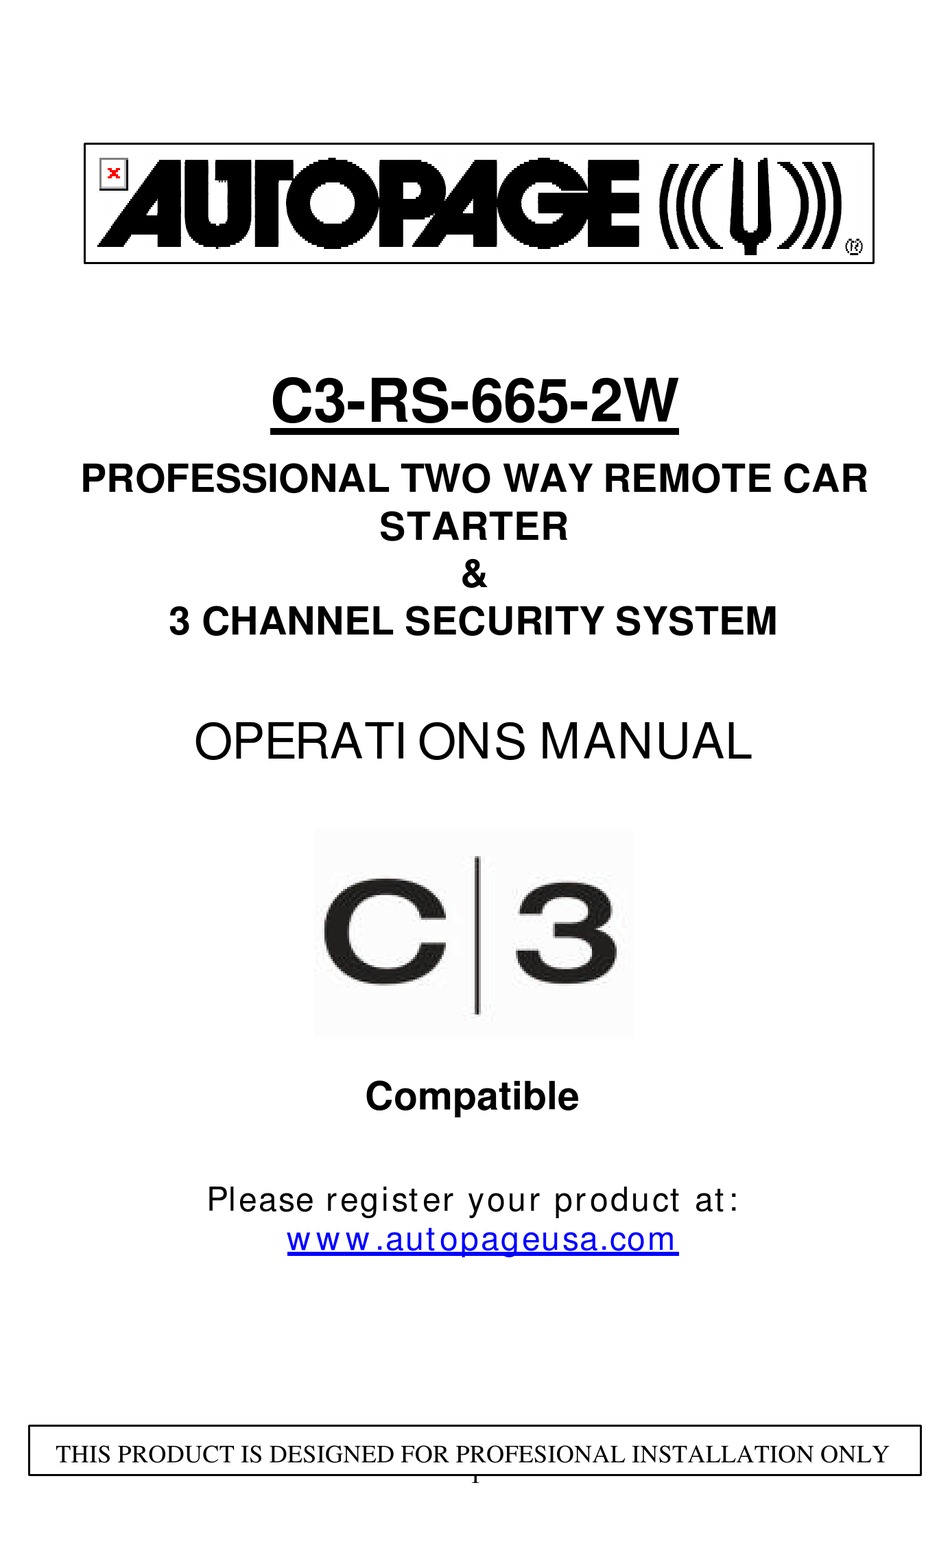 Auto Page C3 Rs 665 2w Operation Manual